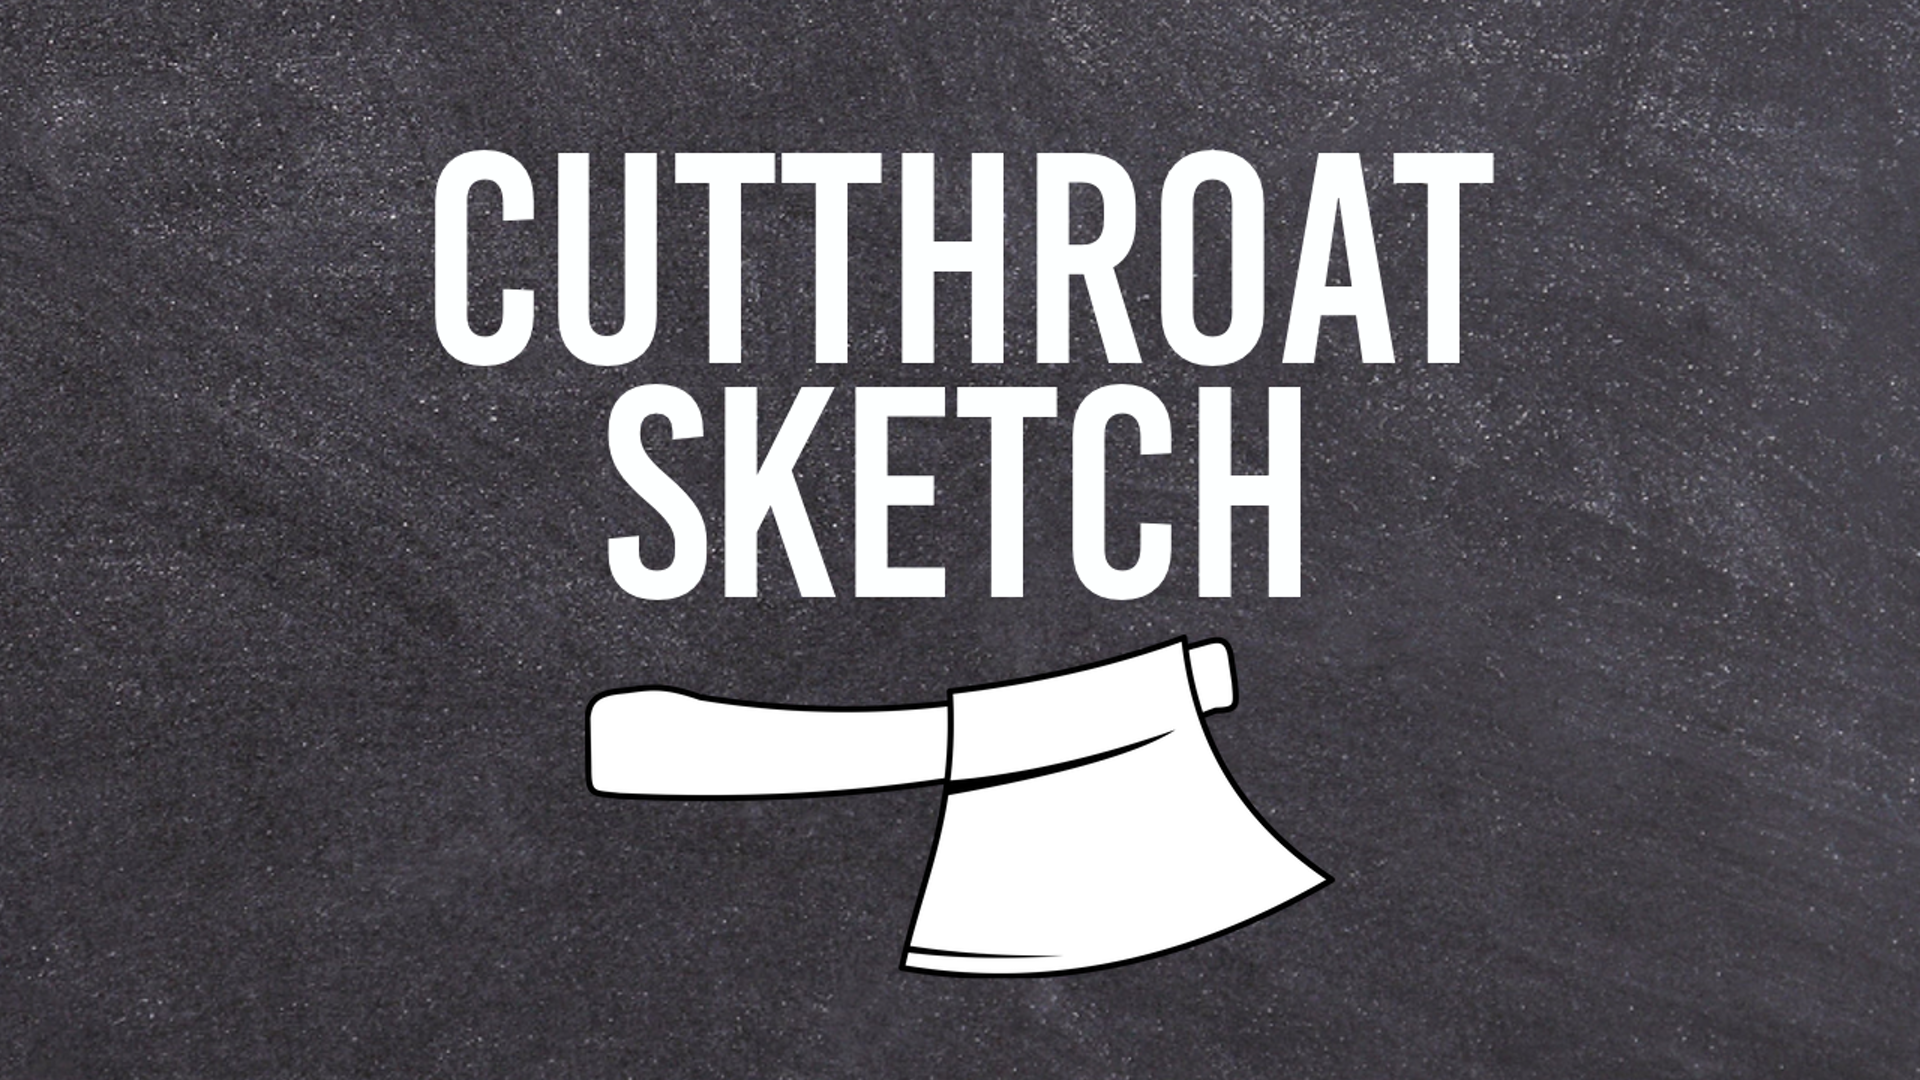 Cutthroat Sketch is casting!